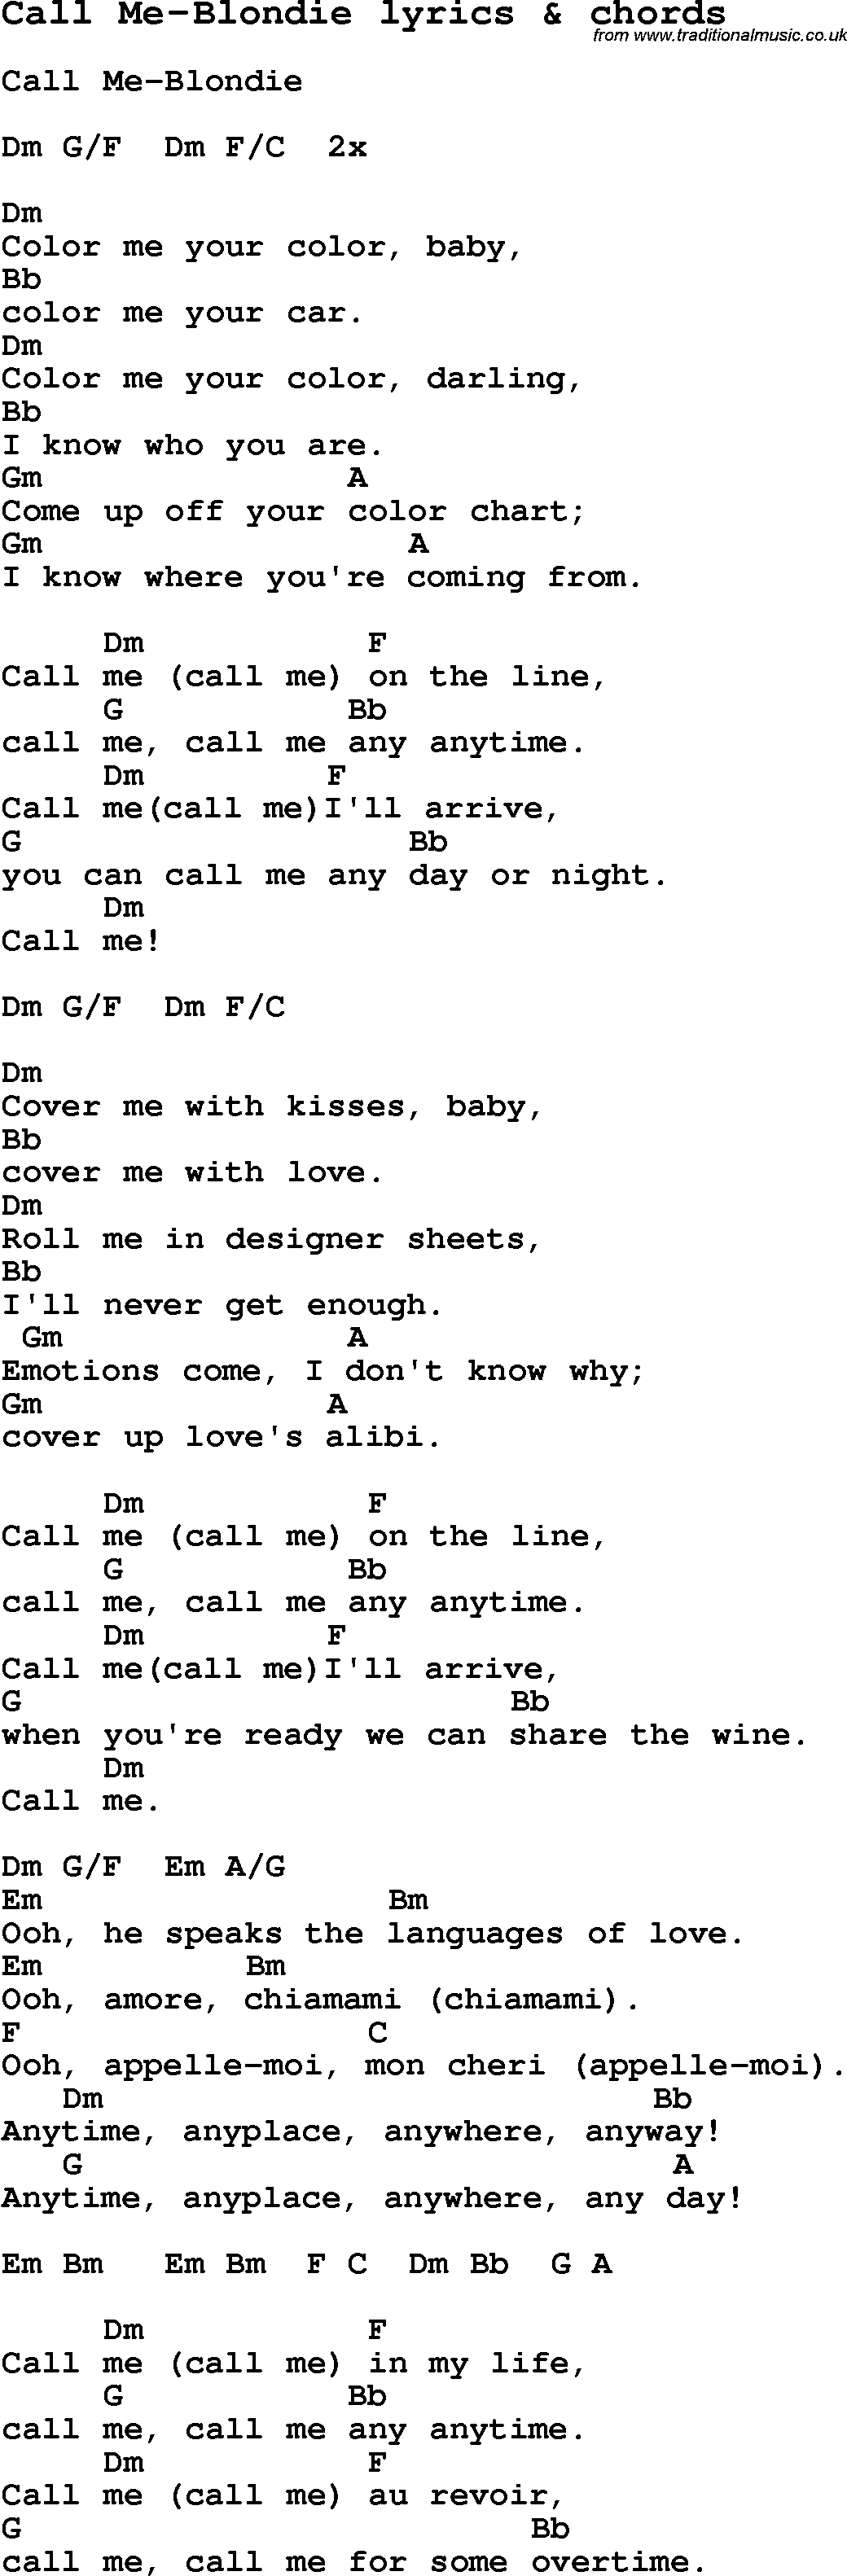 Love Song Lyrics for: Call Me-Blondie with chords for Ukulele, Guitar Banjo etc.